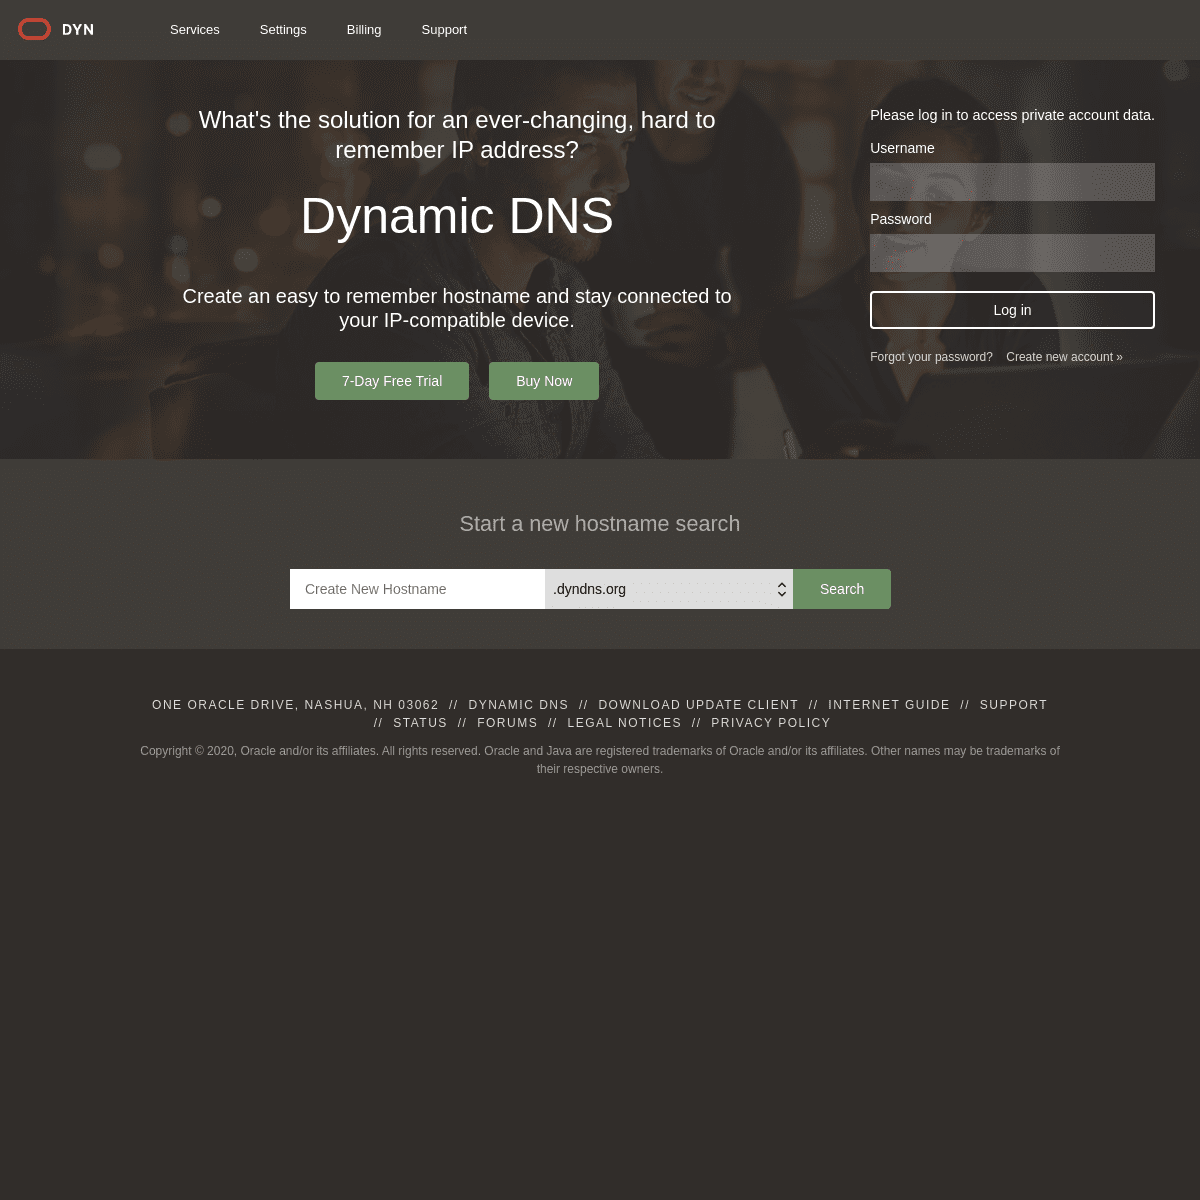 A complete backup of dyndns.org